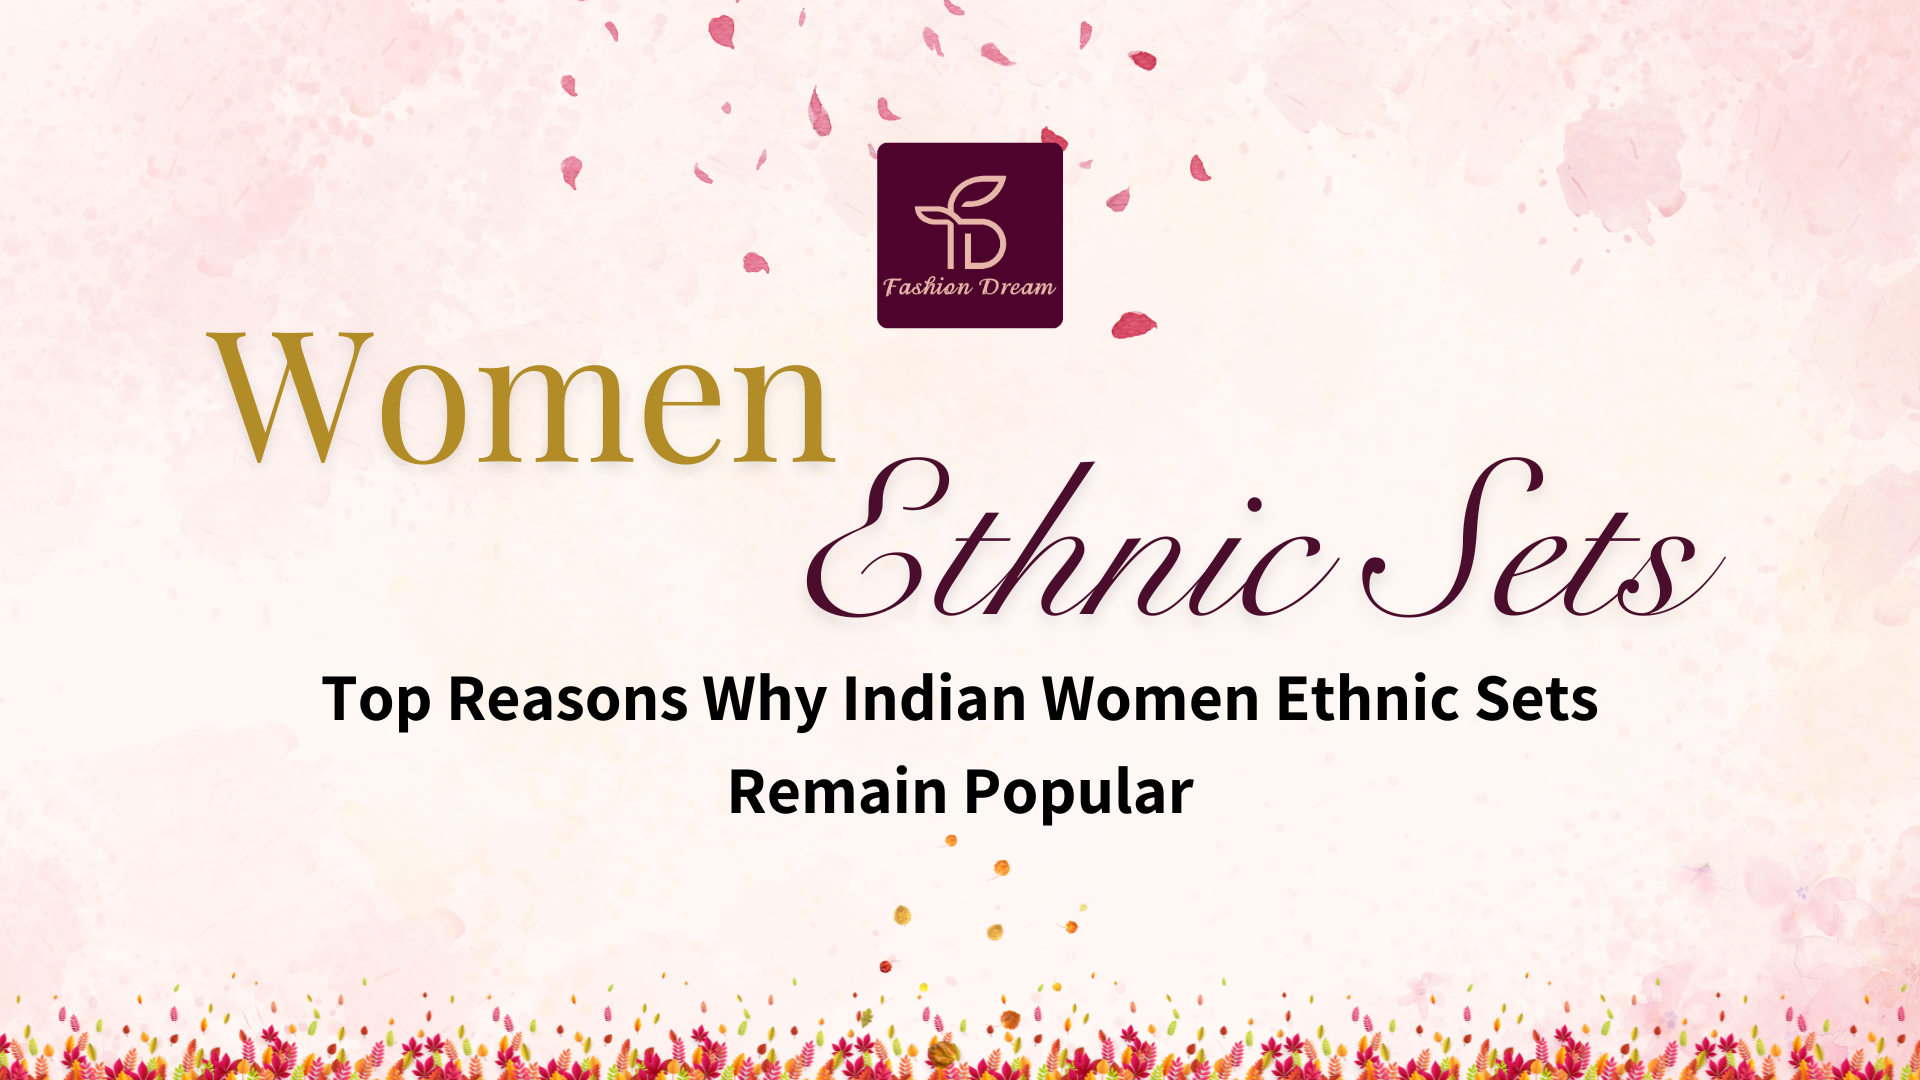 Top Reasons Why Indian Women Ethnic Sets Remain Popular